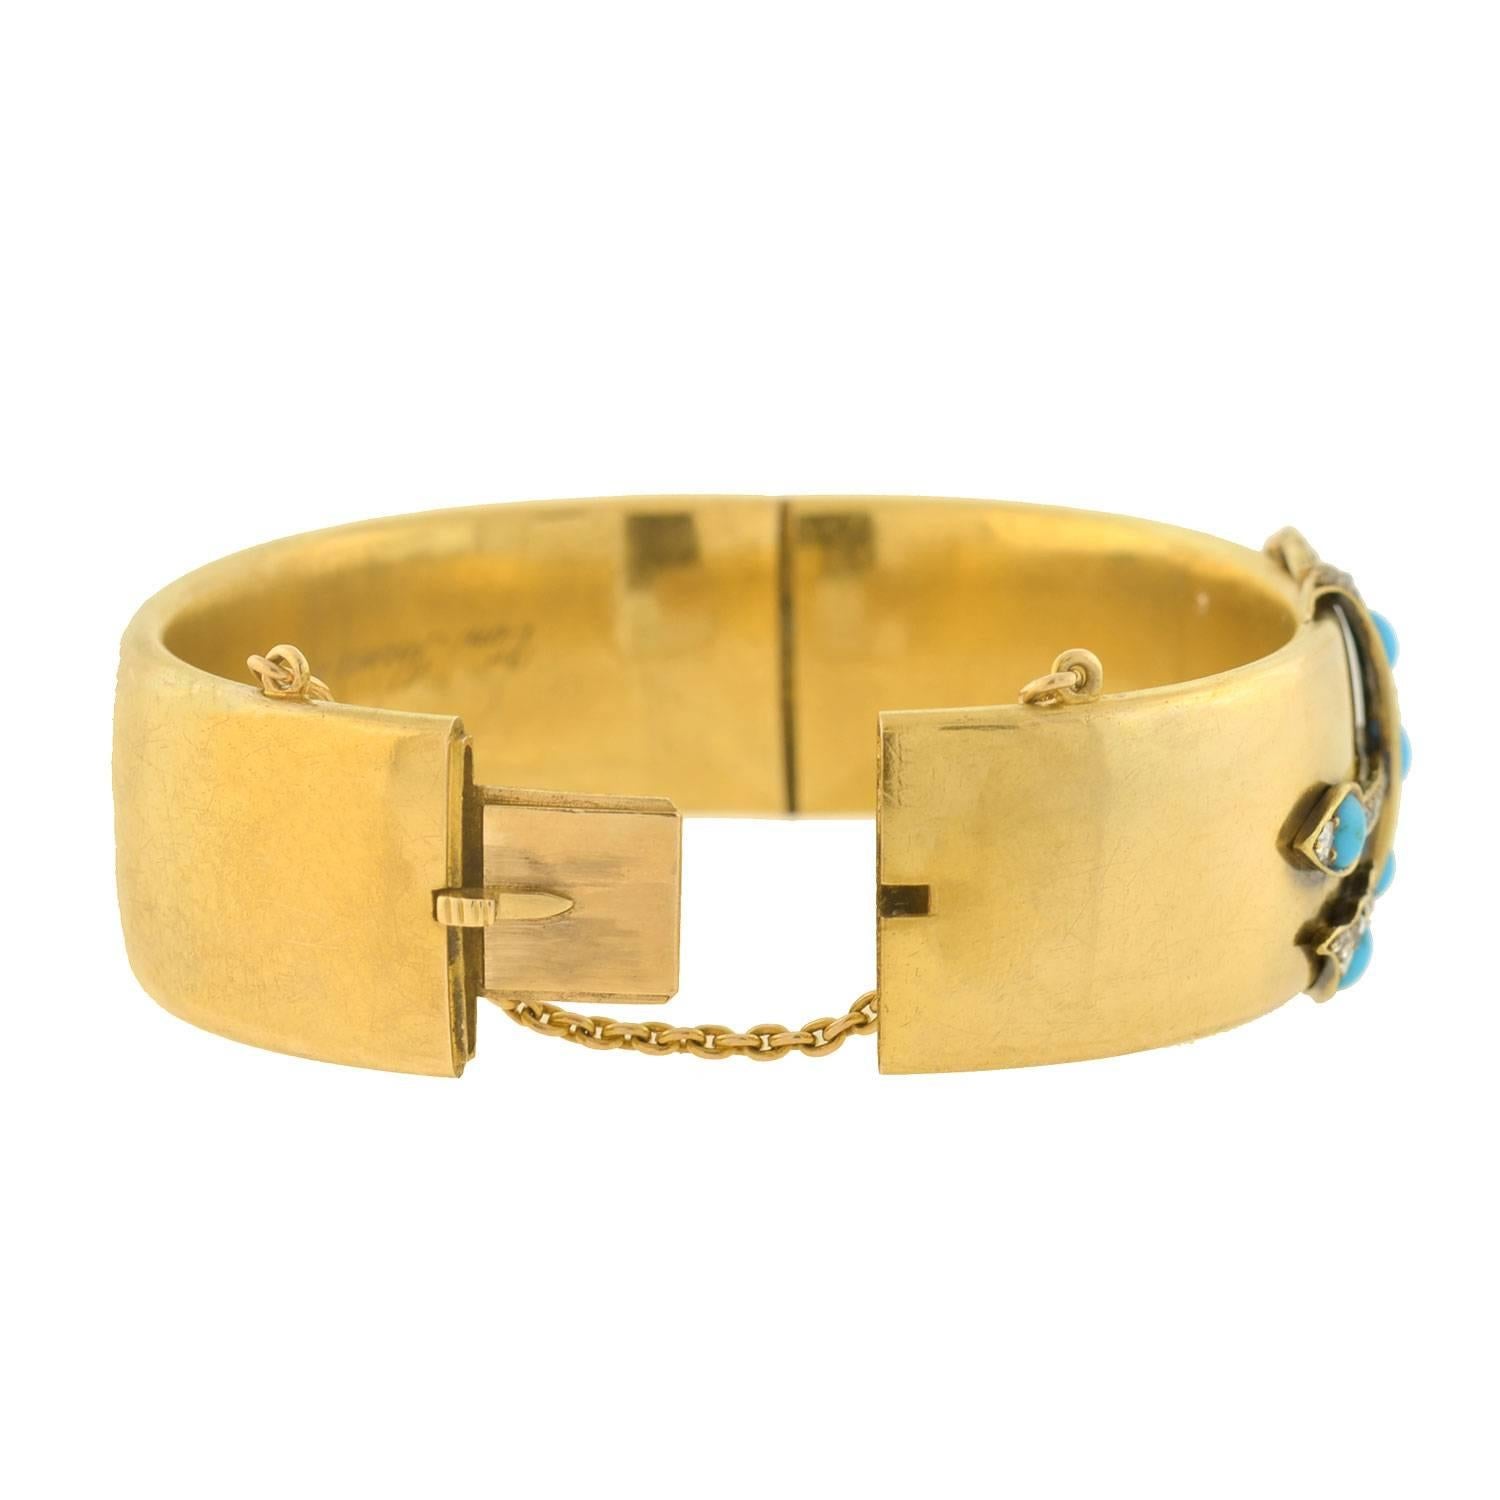 A fabulous turquoise bracelet from the Victorian (ca1869) era! Crafted in 15kt yellow gold, this wonderful piece is a hinged bangle style bracelet with a wide, flat body. At the center of the bracelet is a dynamic wrap-around motif which adorns